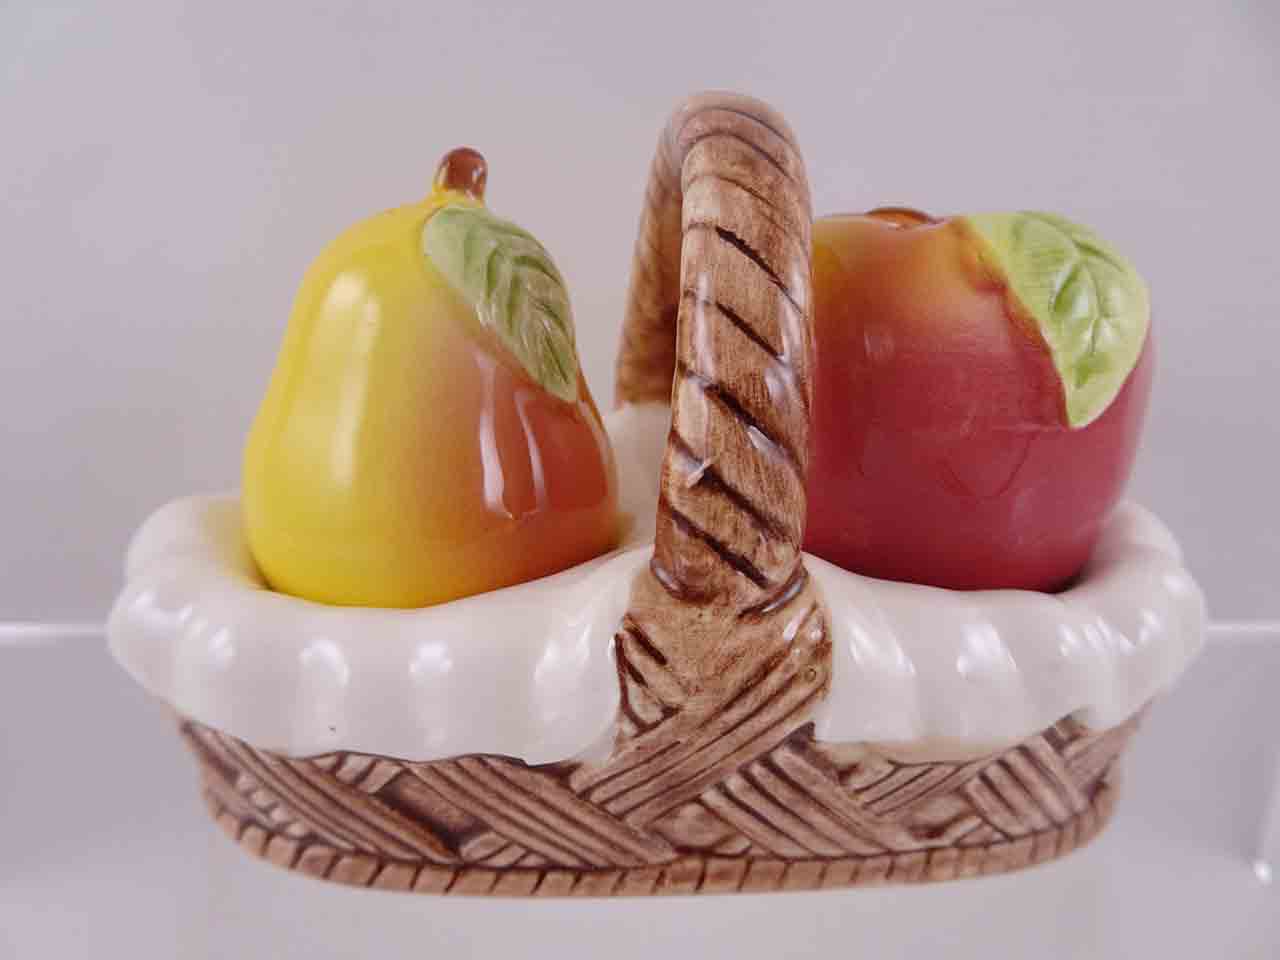 Fruit in ceramic baskets salt and pepper shakers - pear & apple